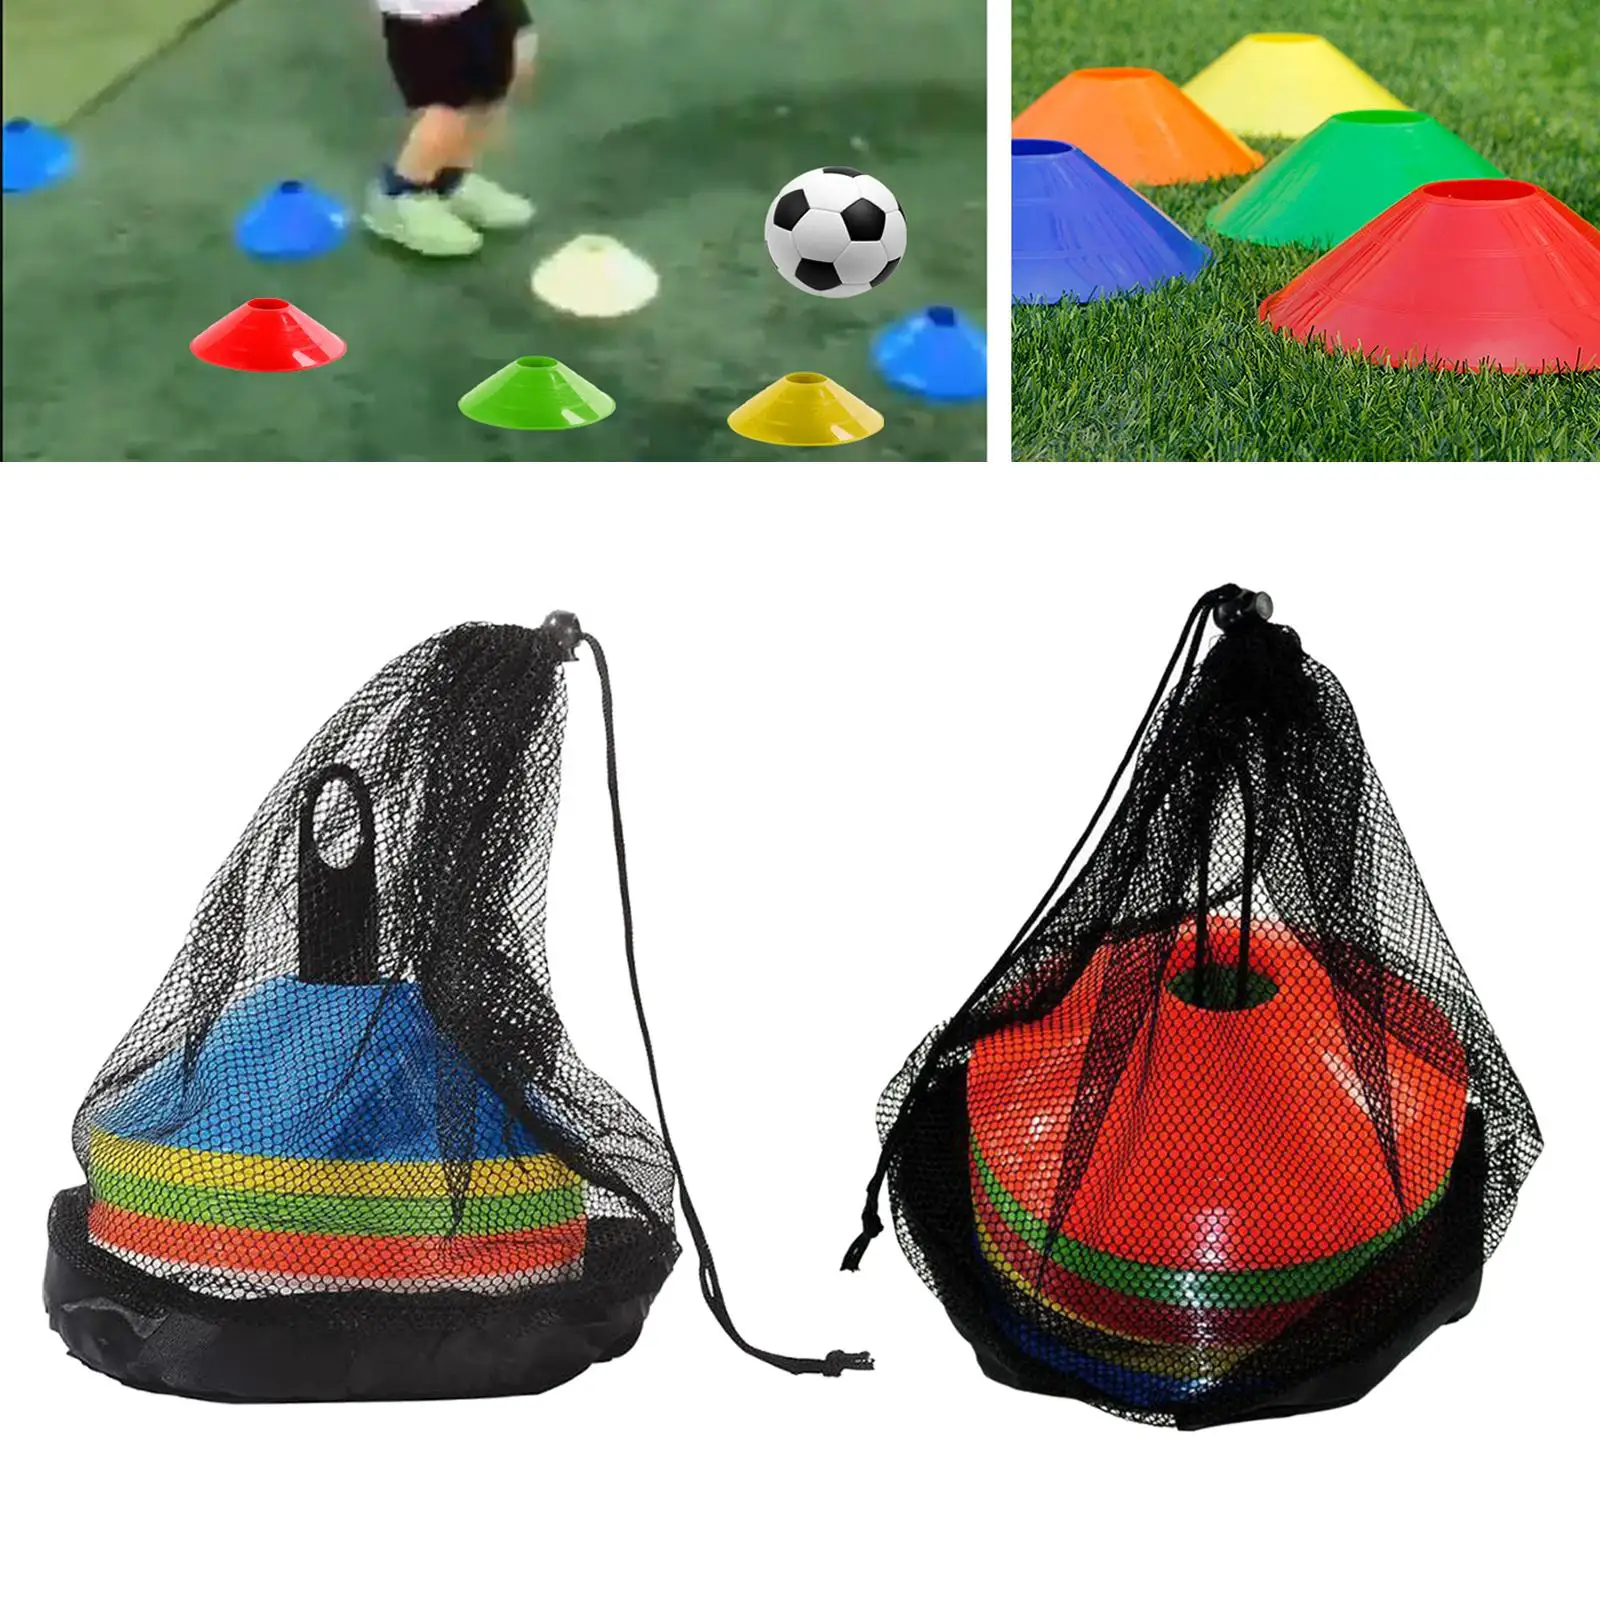 50x Training Cones Agility Soccer Cones for Improve Speed Agility Classroom